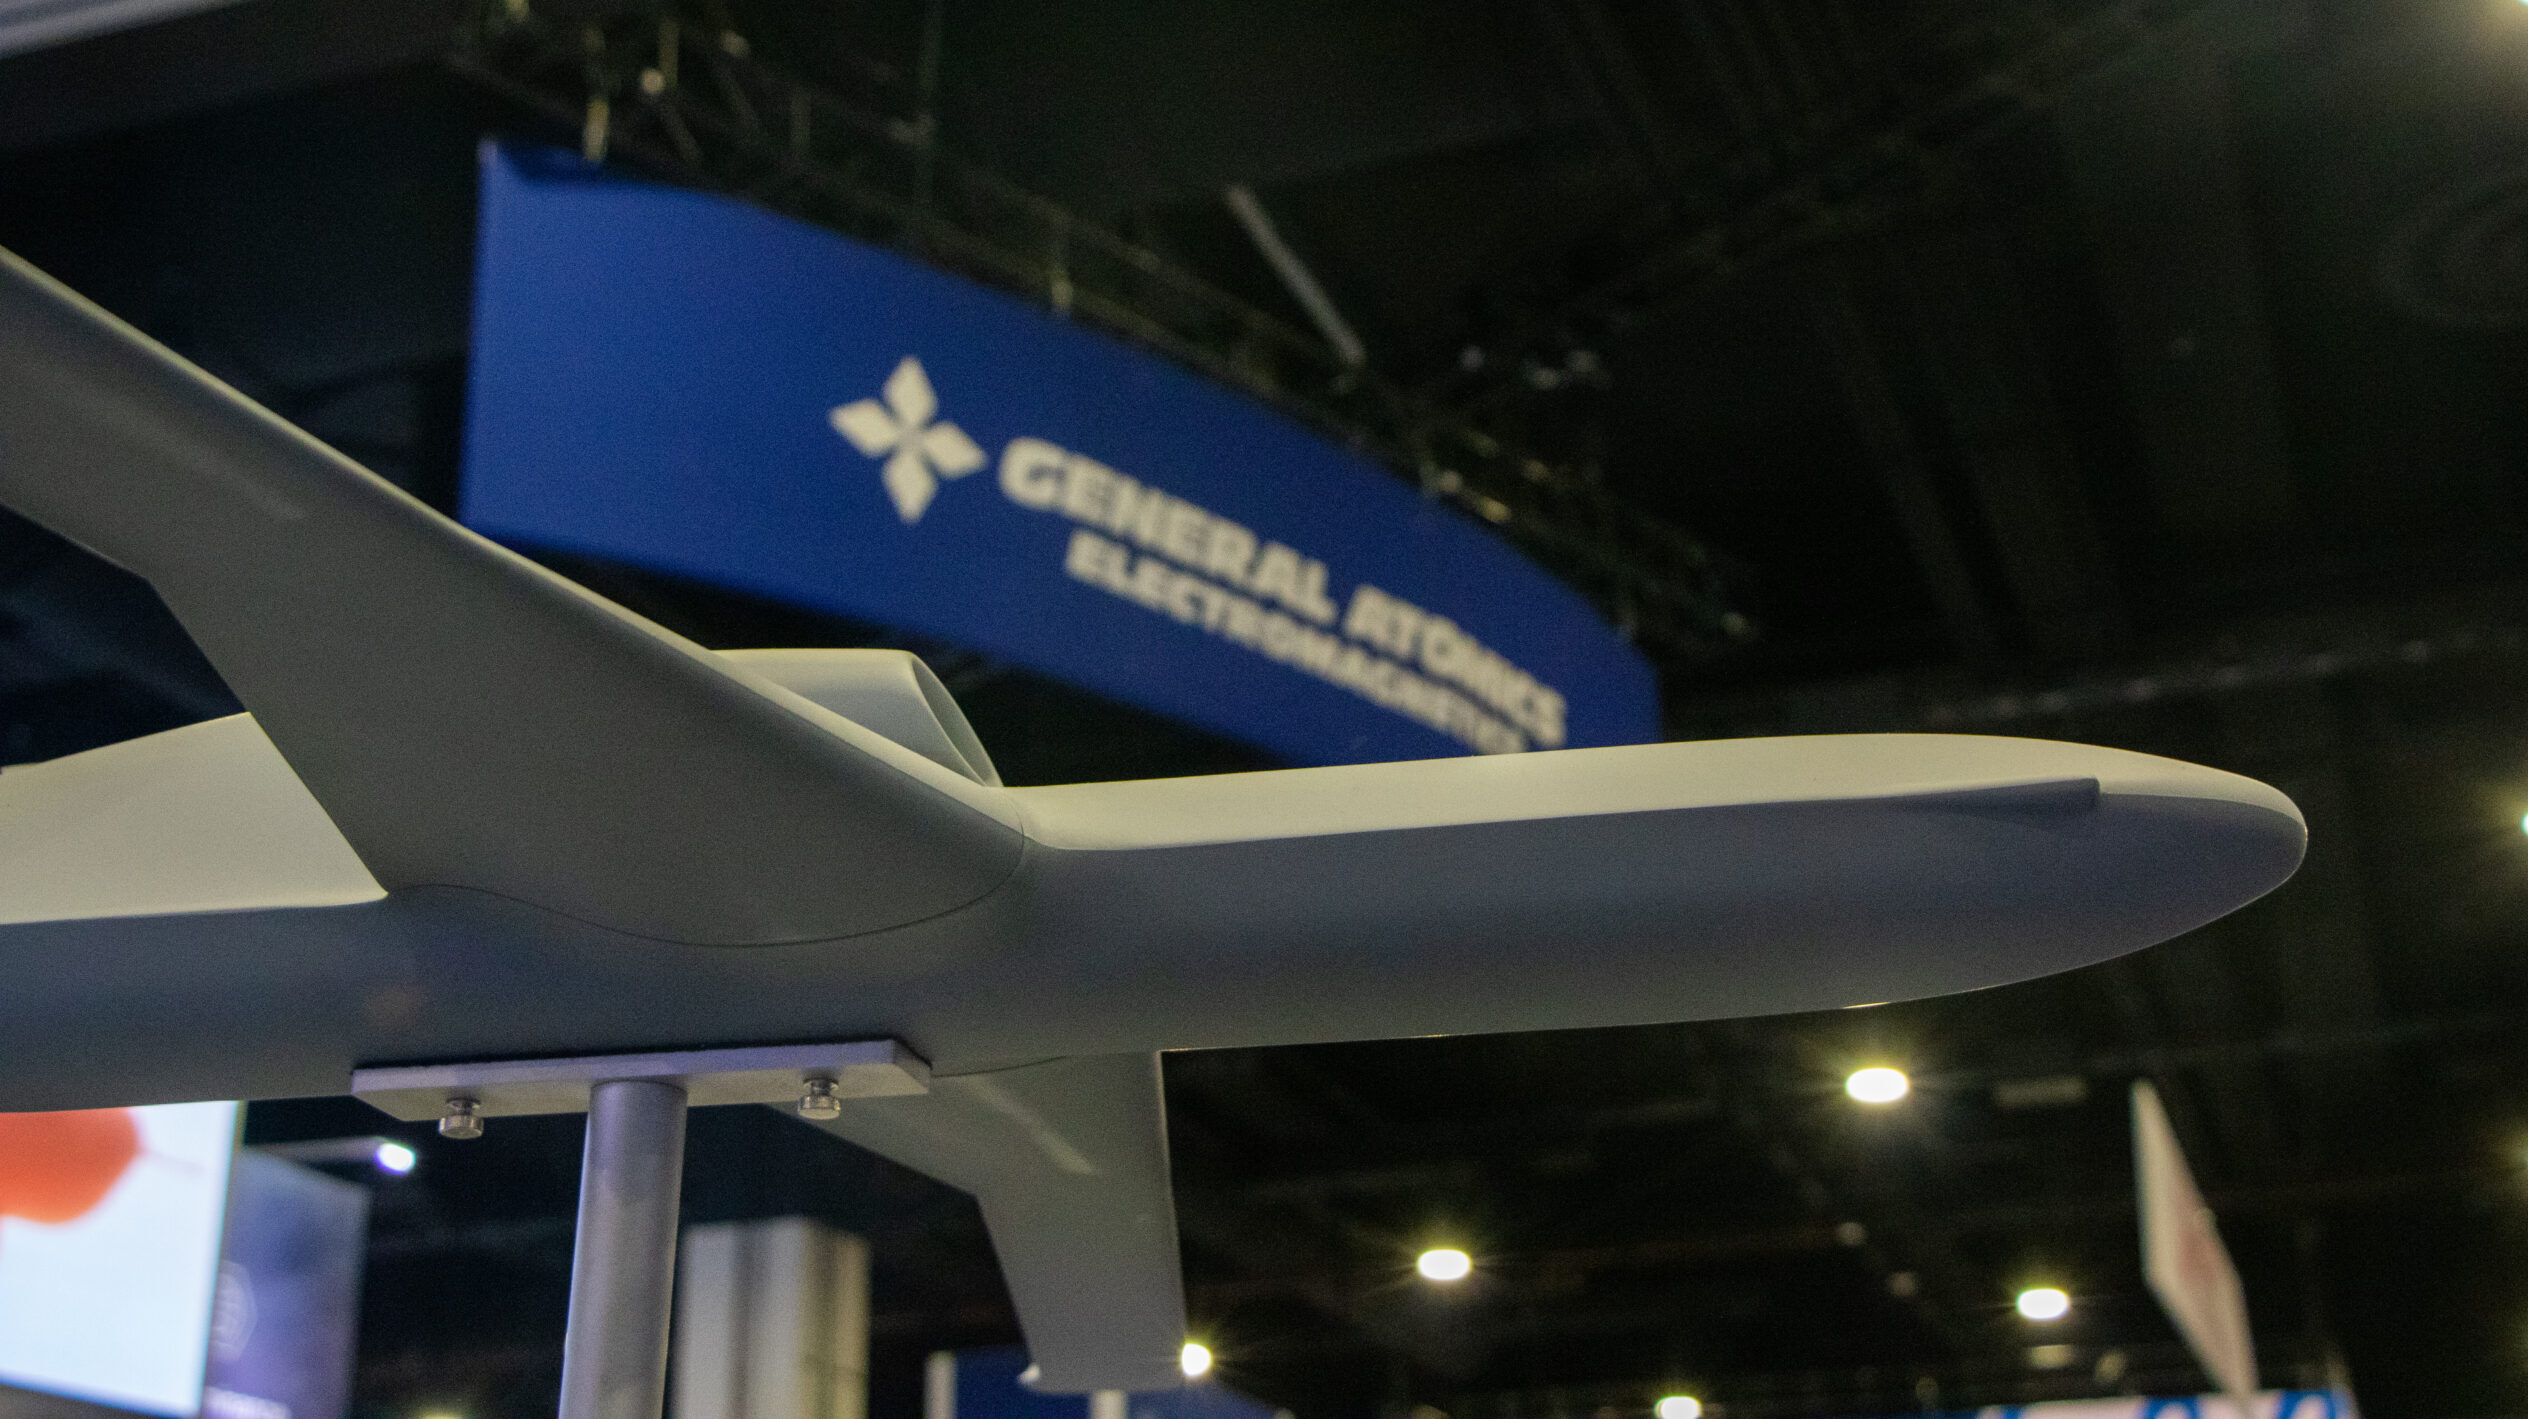 General Atomics signs 3D printing agreement with automotive-focused startup Divergent